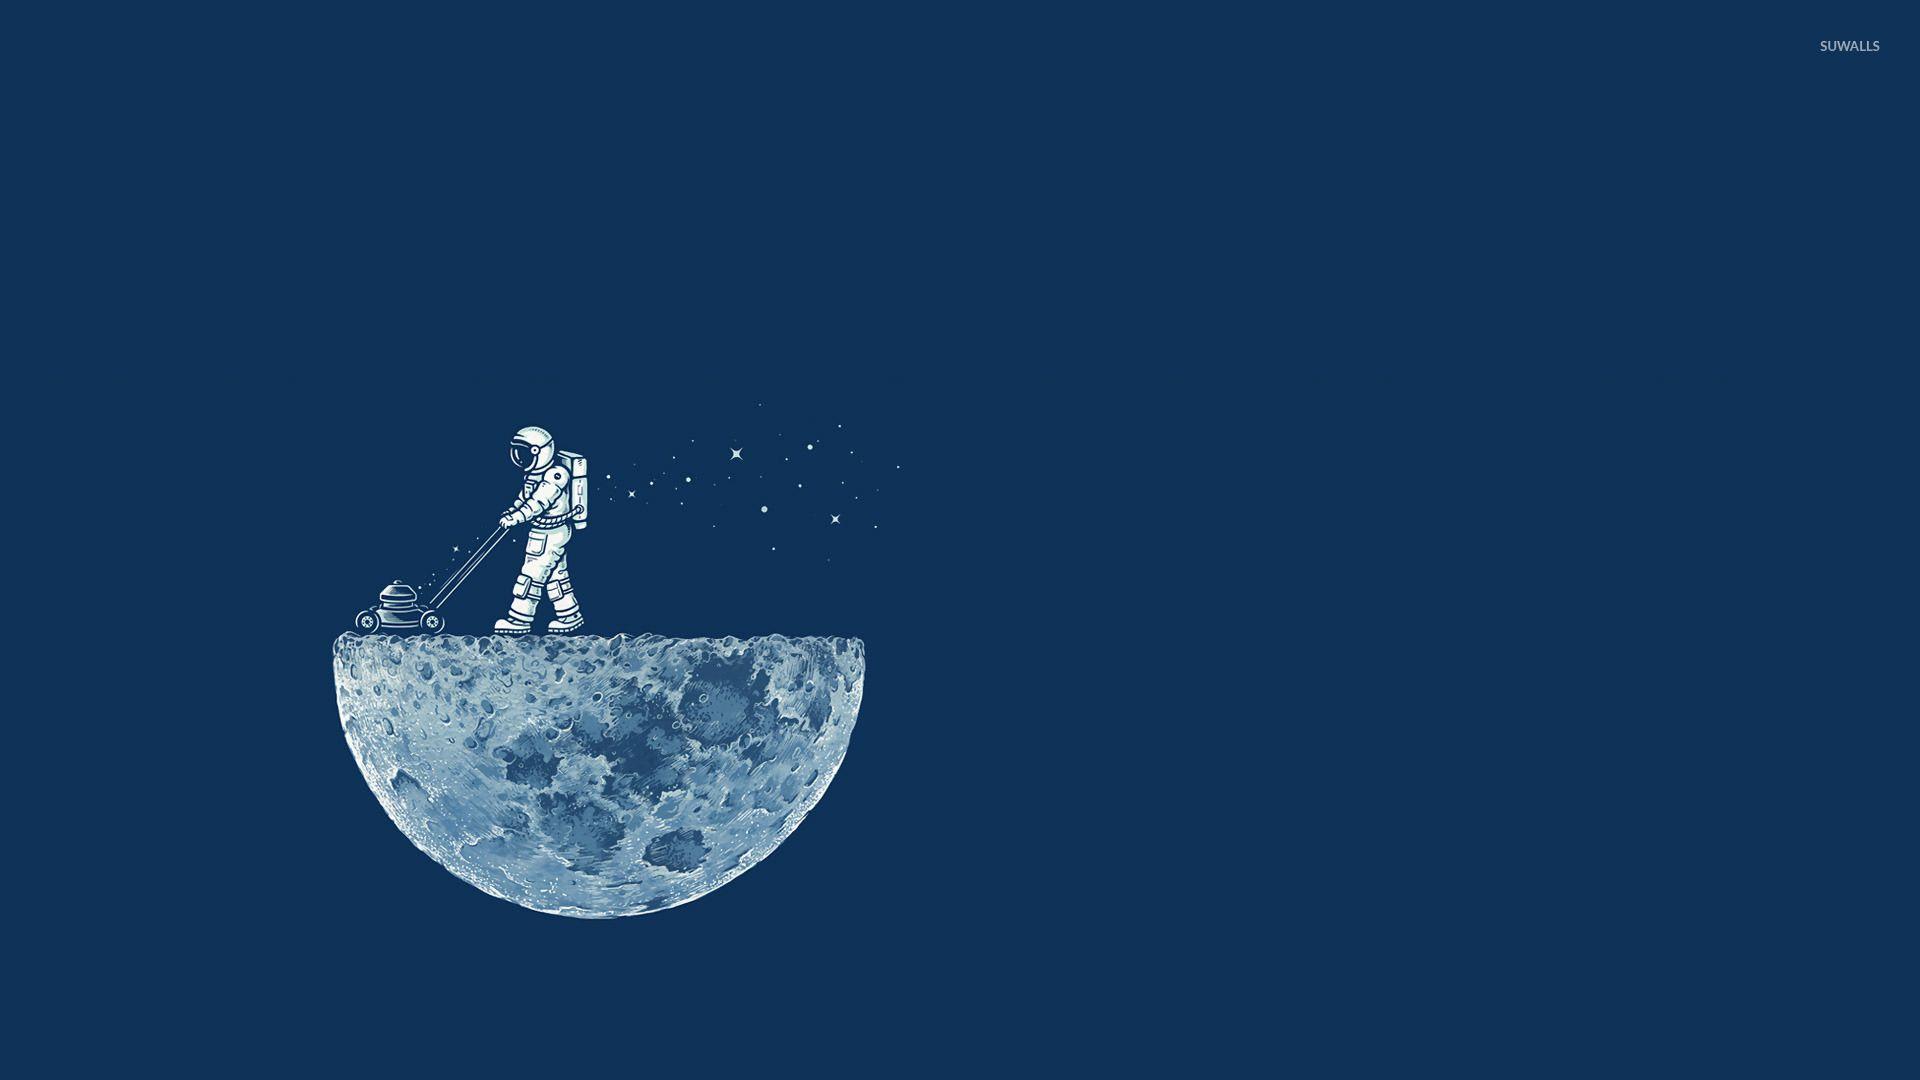 Drawn wallpaper astronaut moon and in color drawn wallpaper